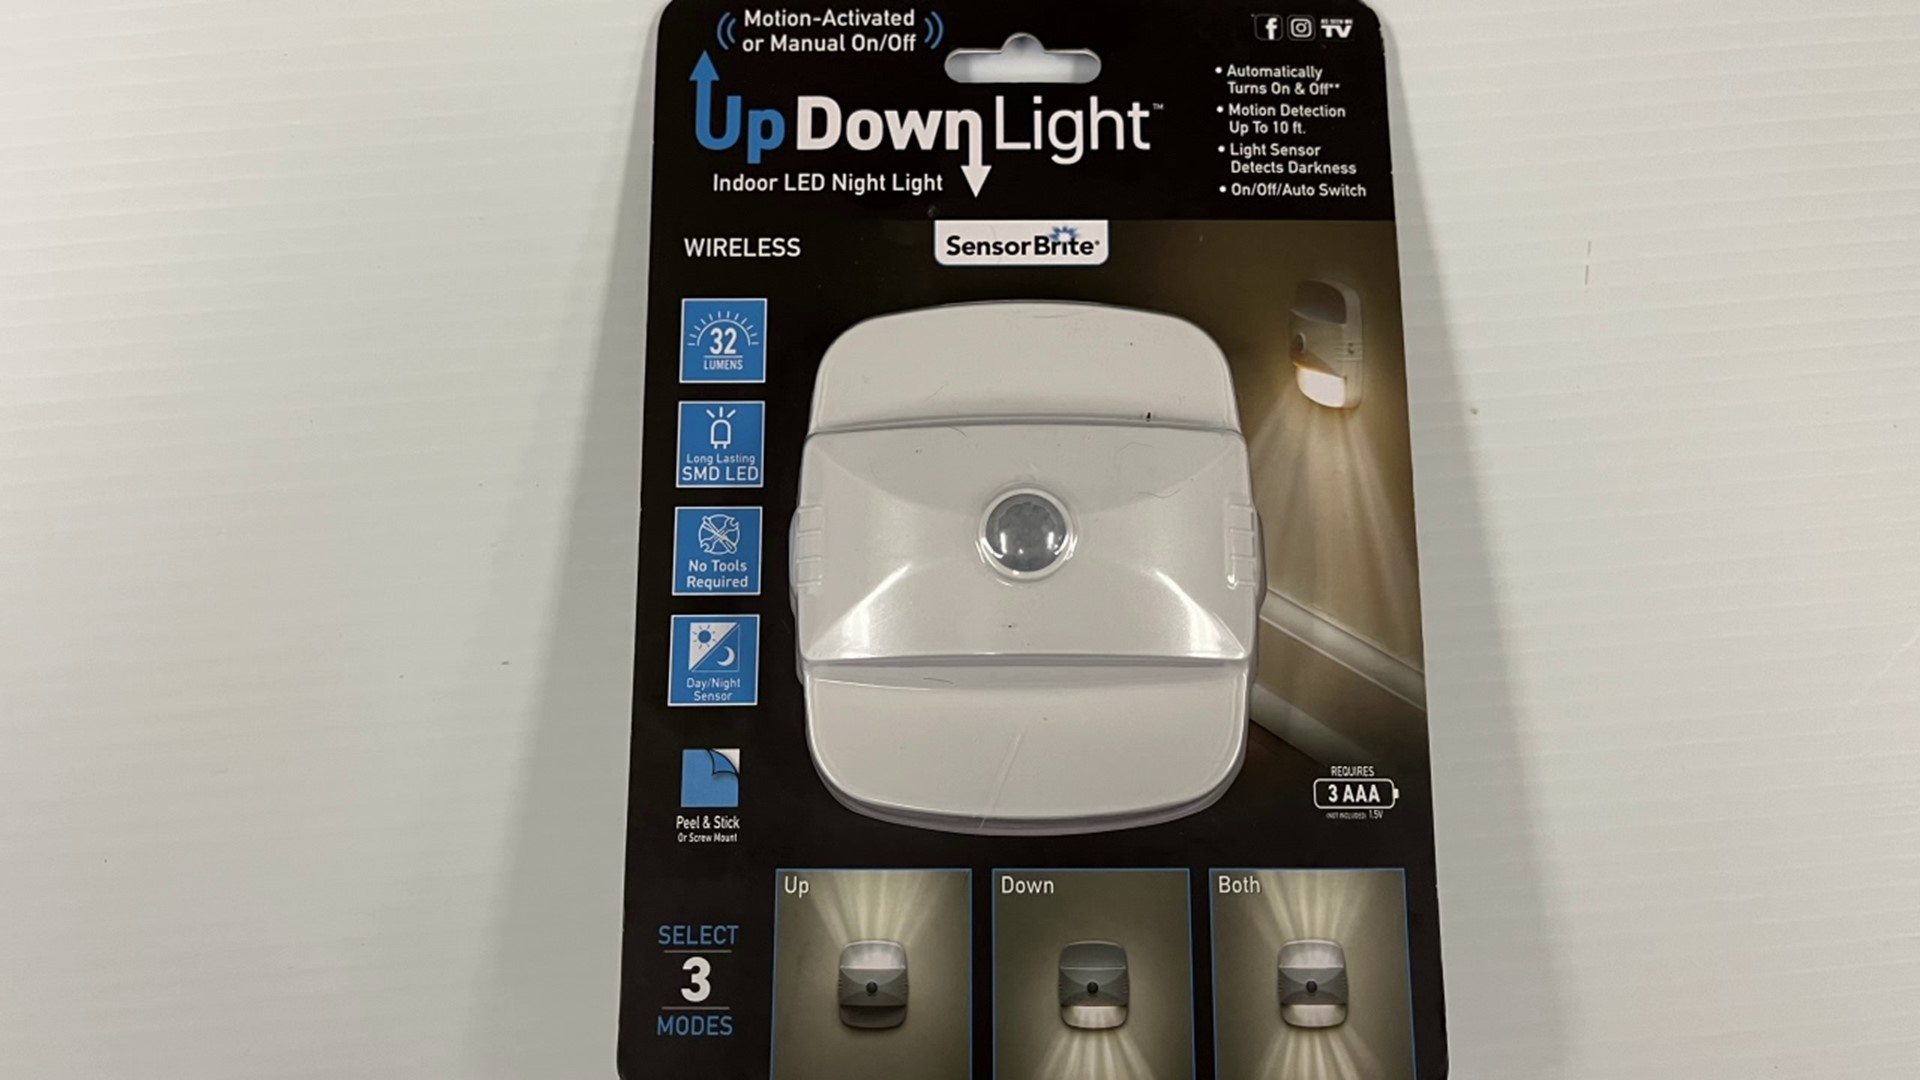 Chief Meteorologist Kurt Aaron tests a product that claims to be one of the best motion lights you can buy for less than $15.